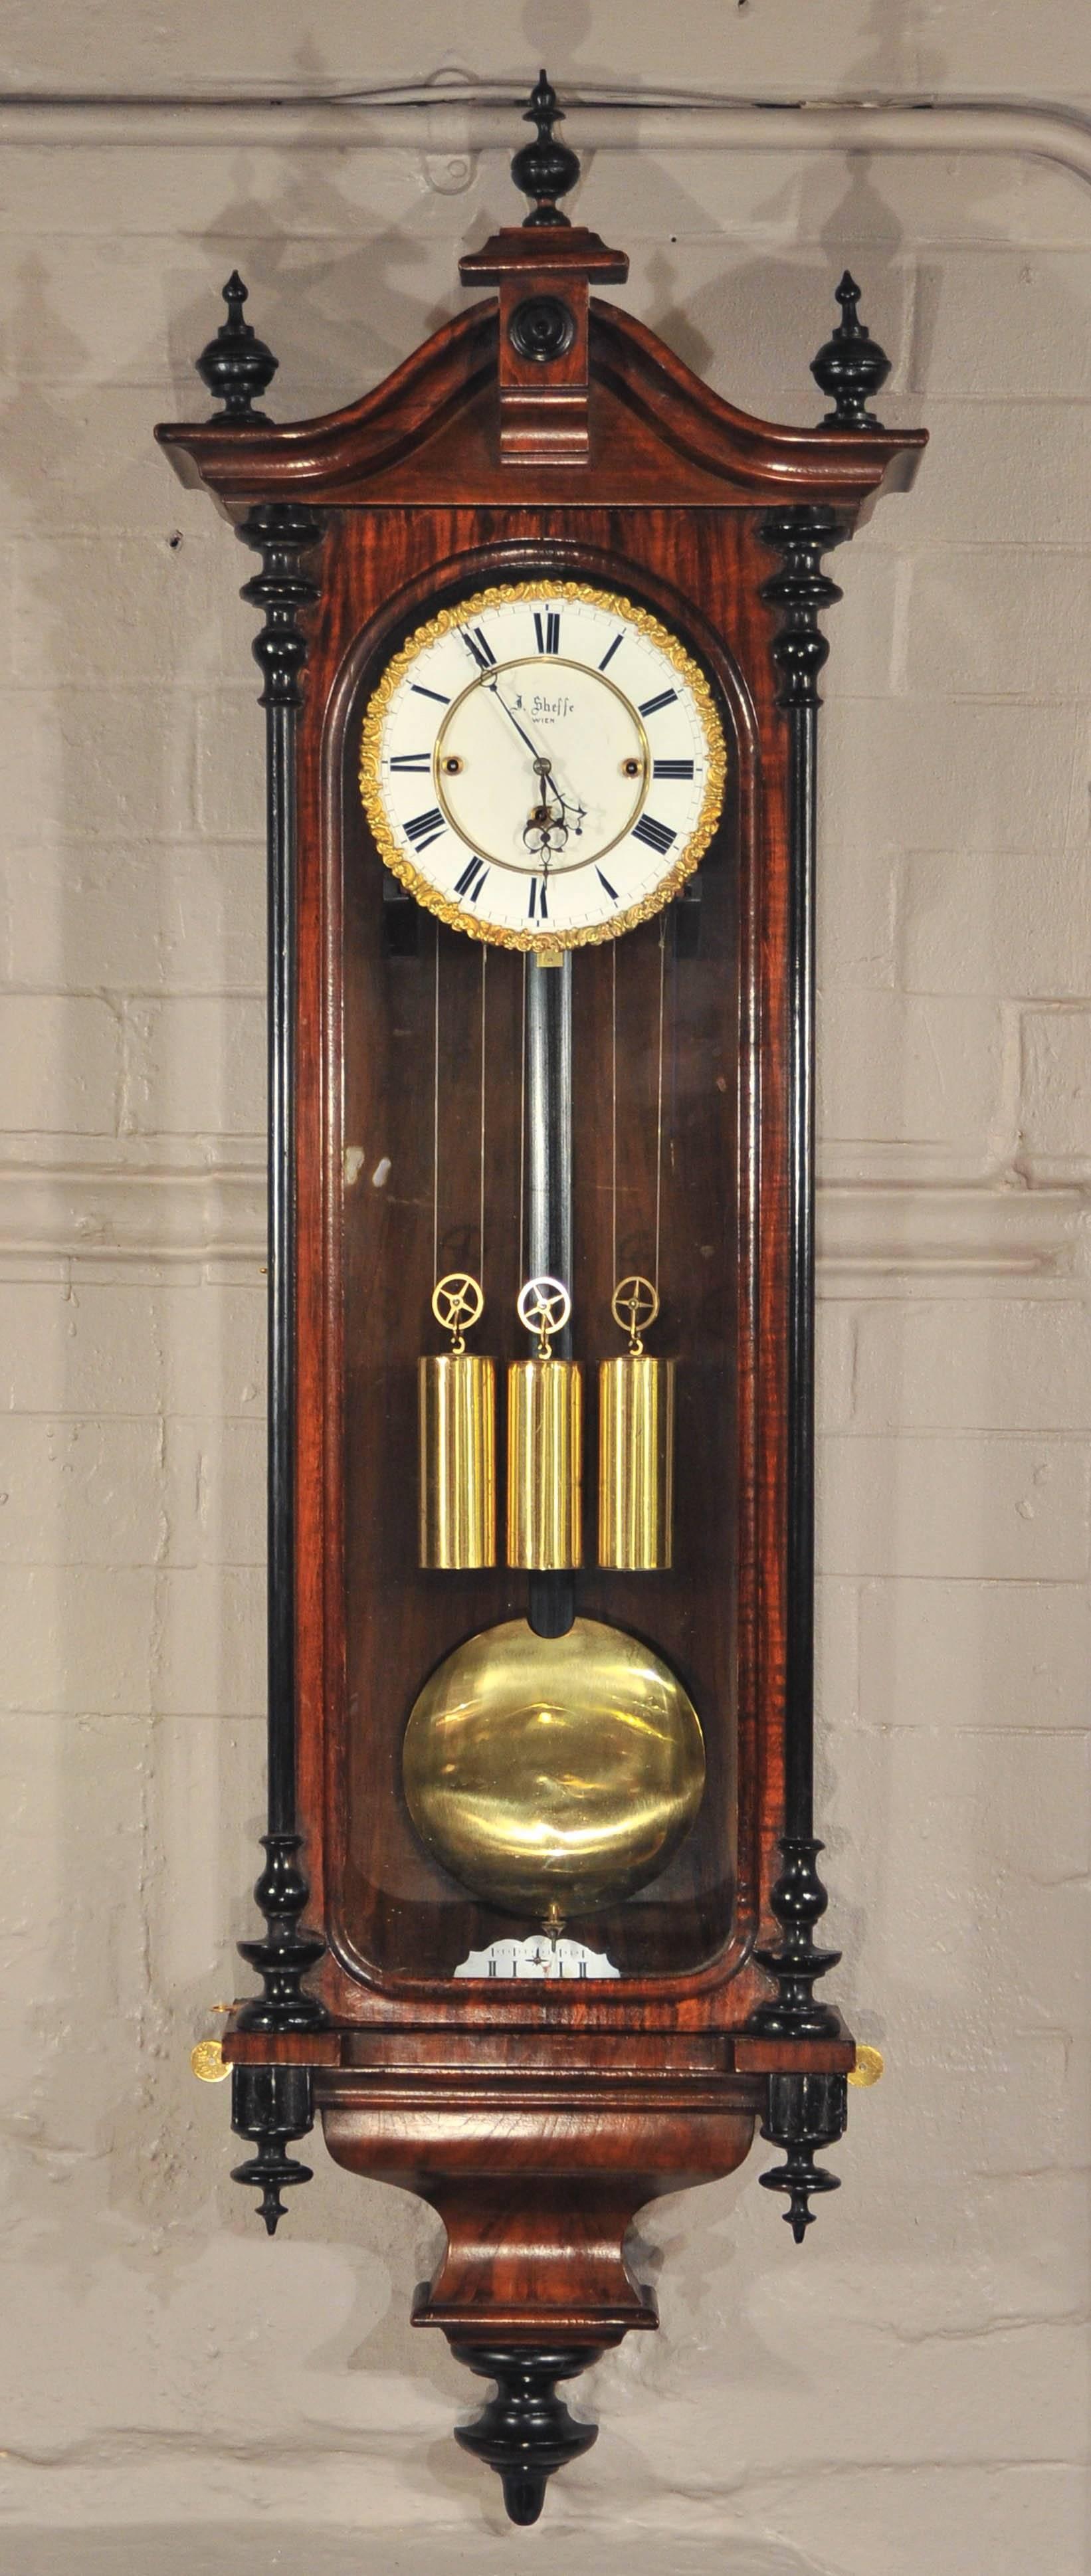 This fine clock case of simulated rosewood with ebonised columns and finials. The fully restored eight day duration triple train movement striking on two steel curled gongs every quarter hour. The enamelled dial with Roman numerals and finely cast